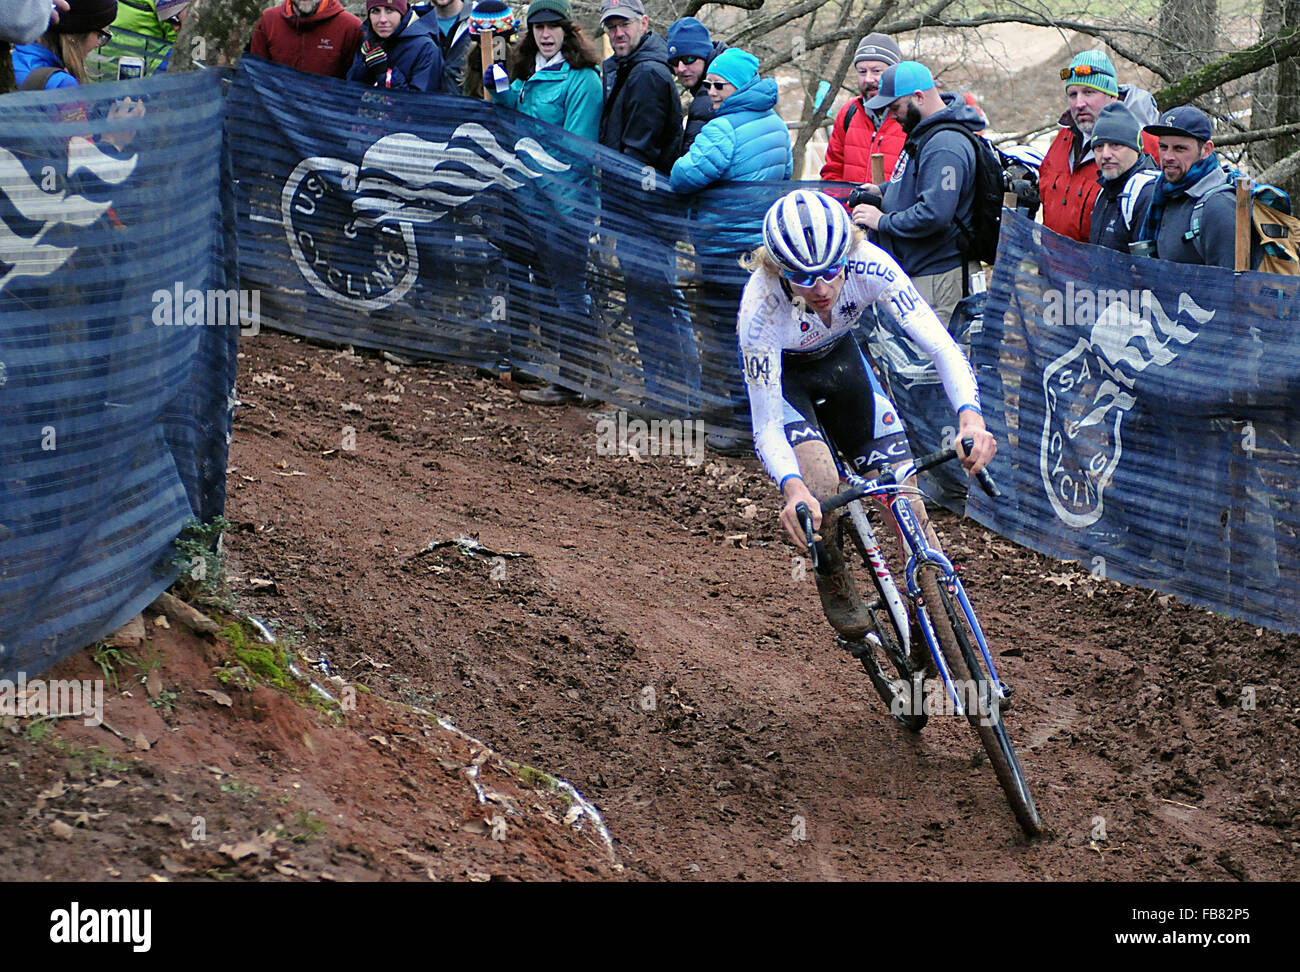 Asheville, North Carolina, USA. 10th Jan, 2016. A Jam/NCC/Vittoria U23 cyclist, Scott Smith, works his way through a difficult downhill section during the USA Cycling Cyclo-Cross National Championships at the historic Biltmore Estate, Asheville, North Carolina. © csm/Alamy Live News Stock Photo